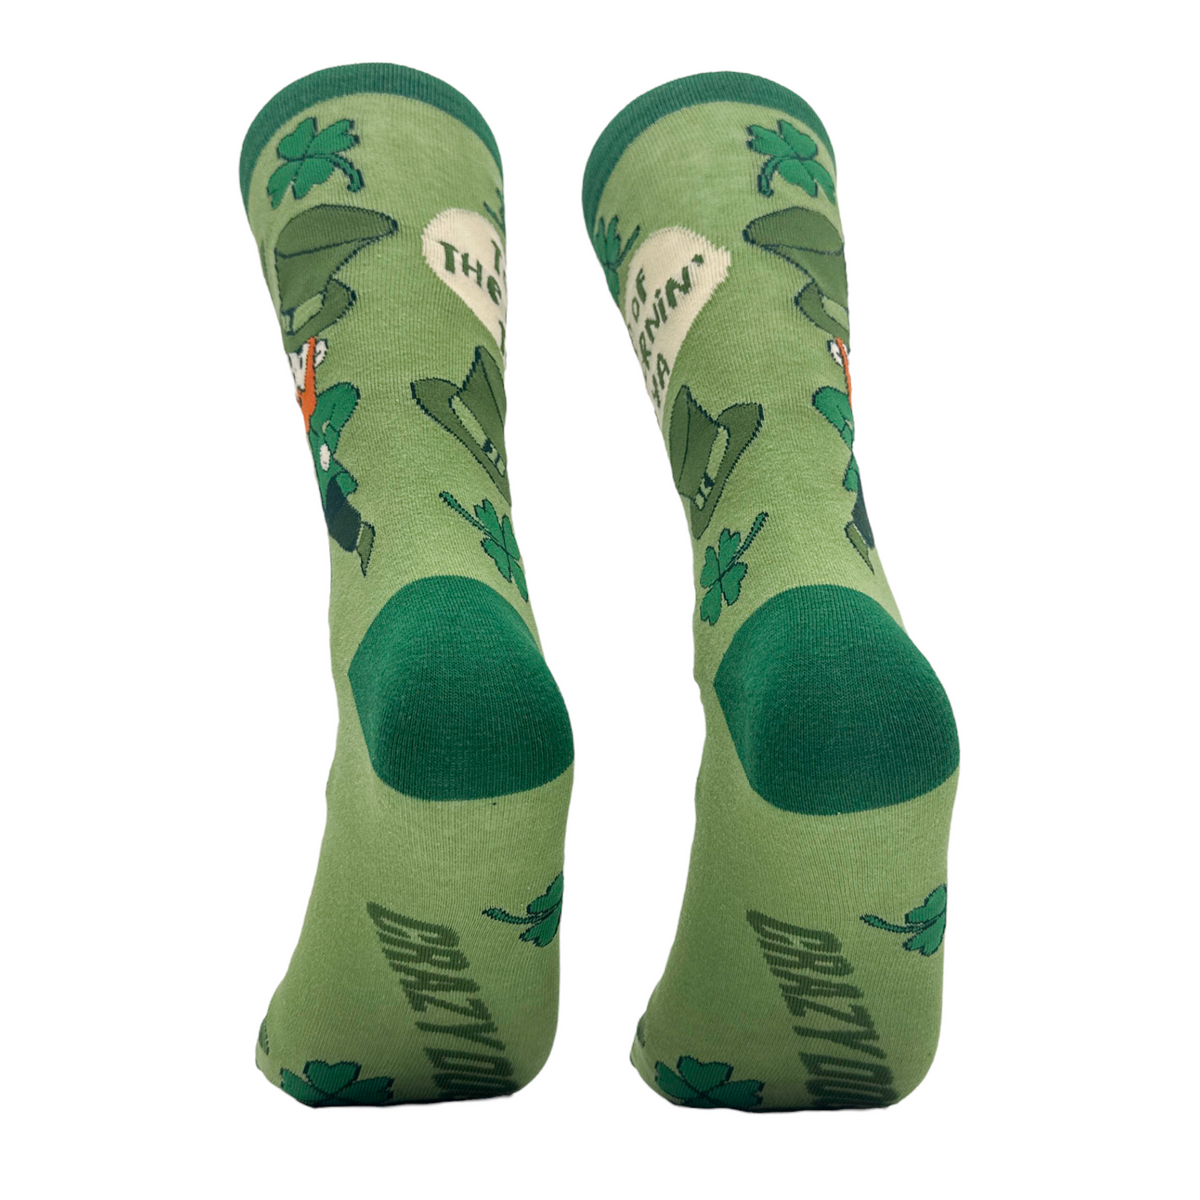 Men&#39;s Top Of The Morning To Ya Socks Funny Cute St Paddys Day Leprechaun Footwear